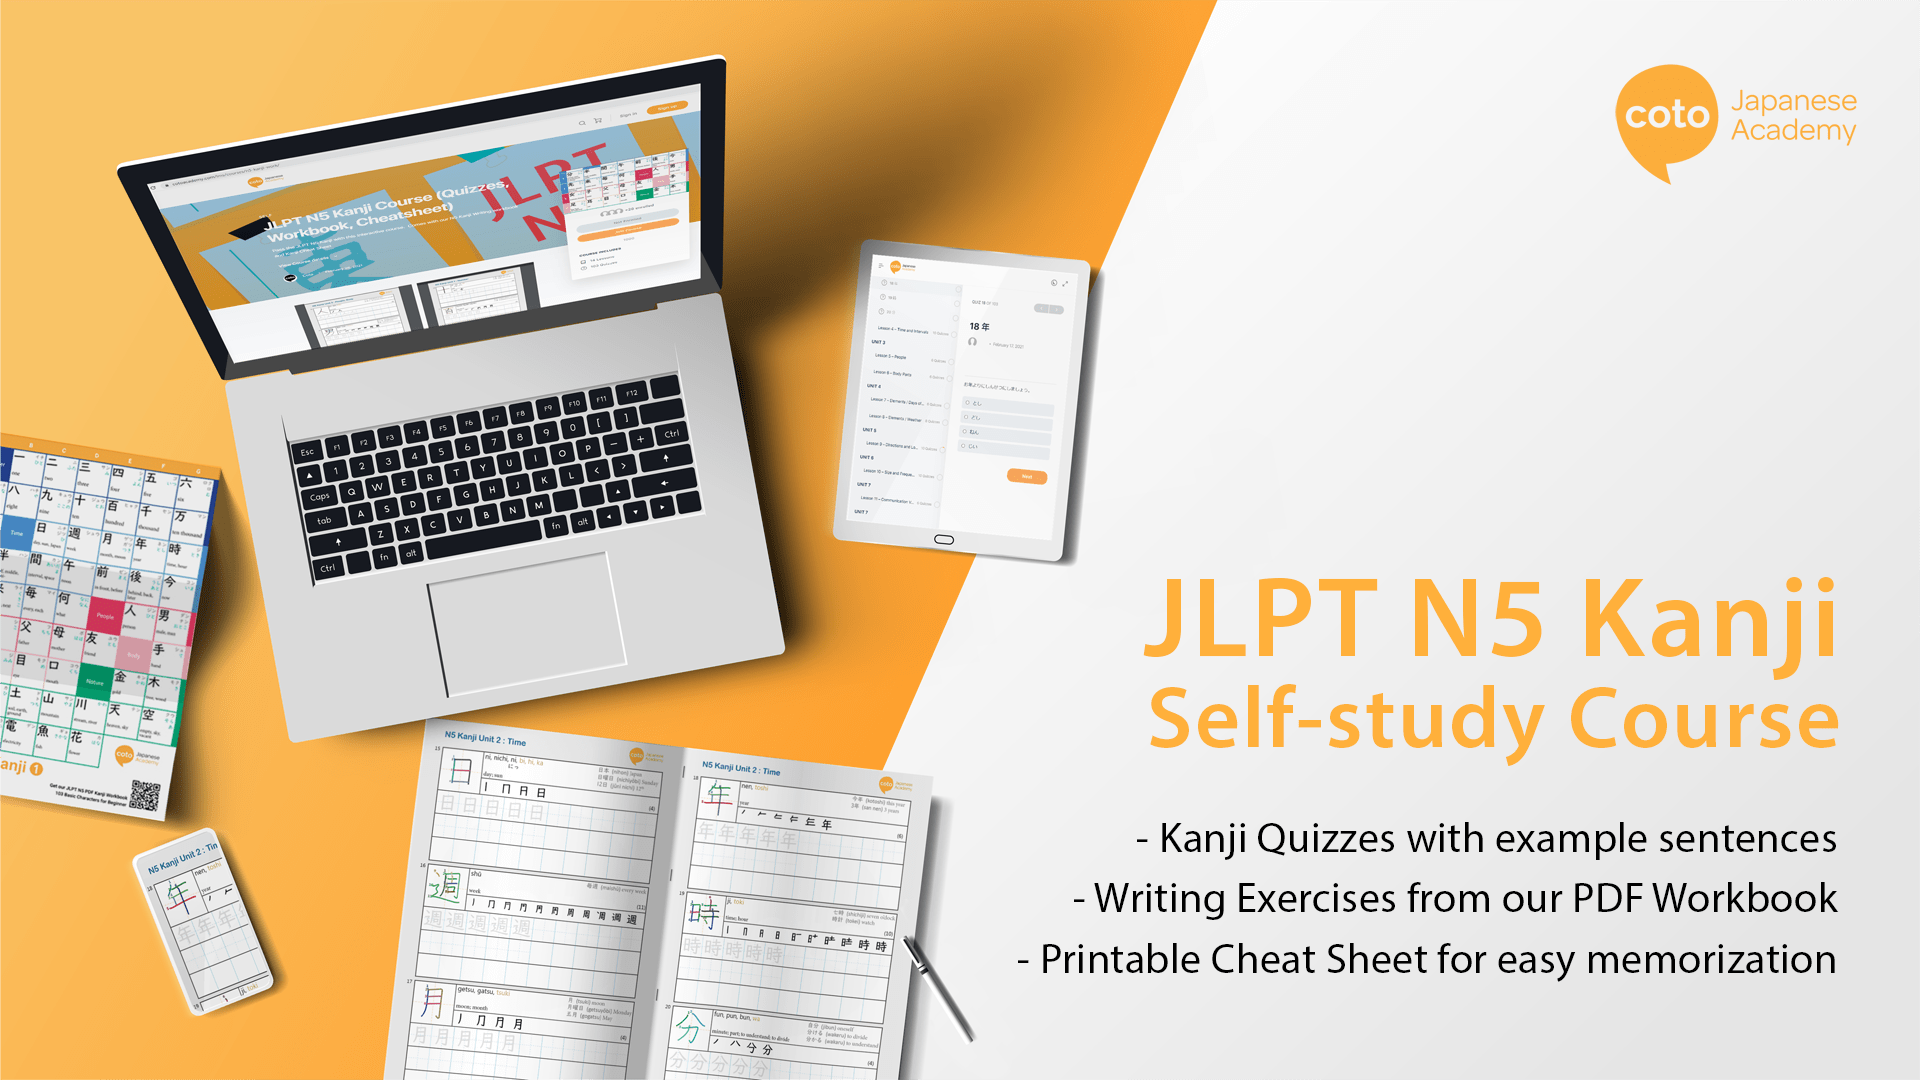 JLPT N5 Kanji Self-Study Course is now available | Coto Academy